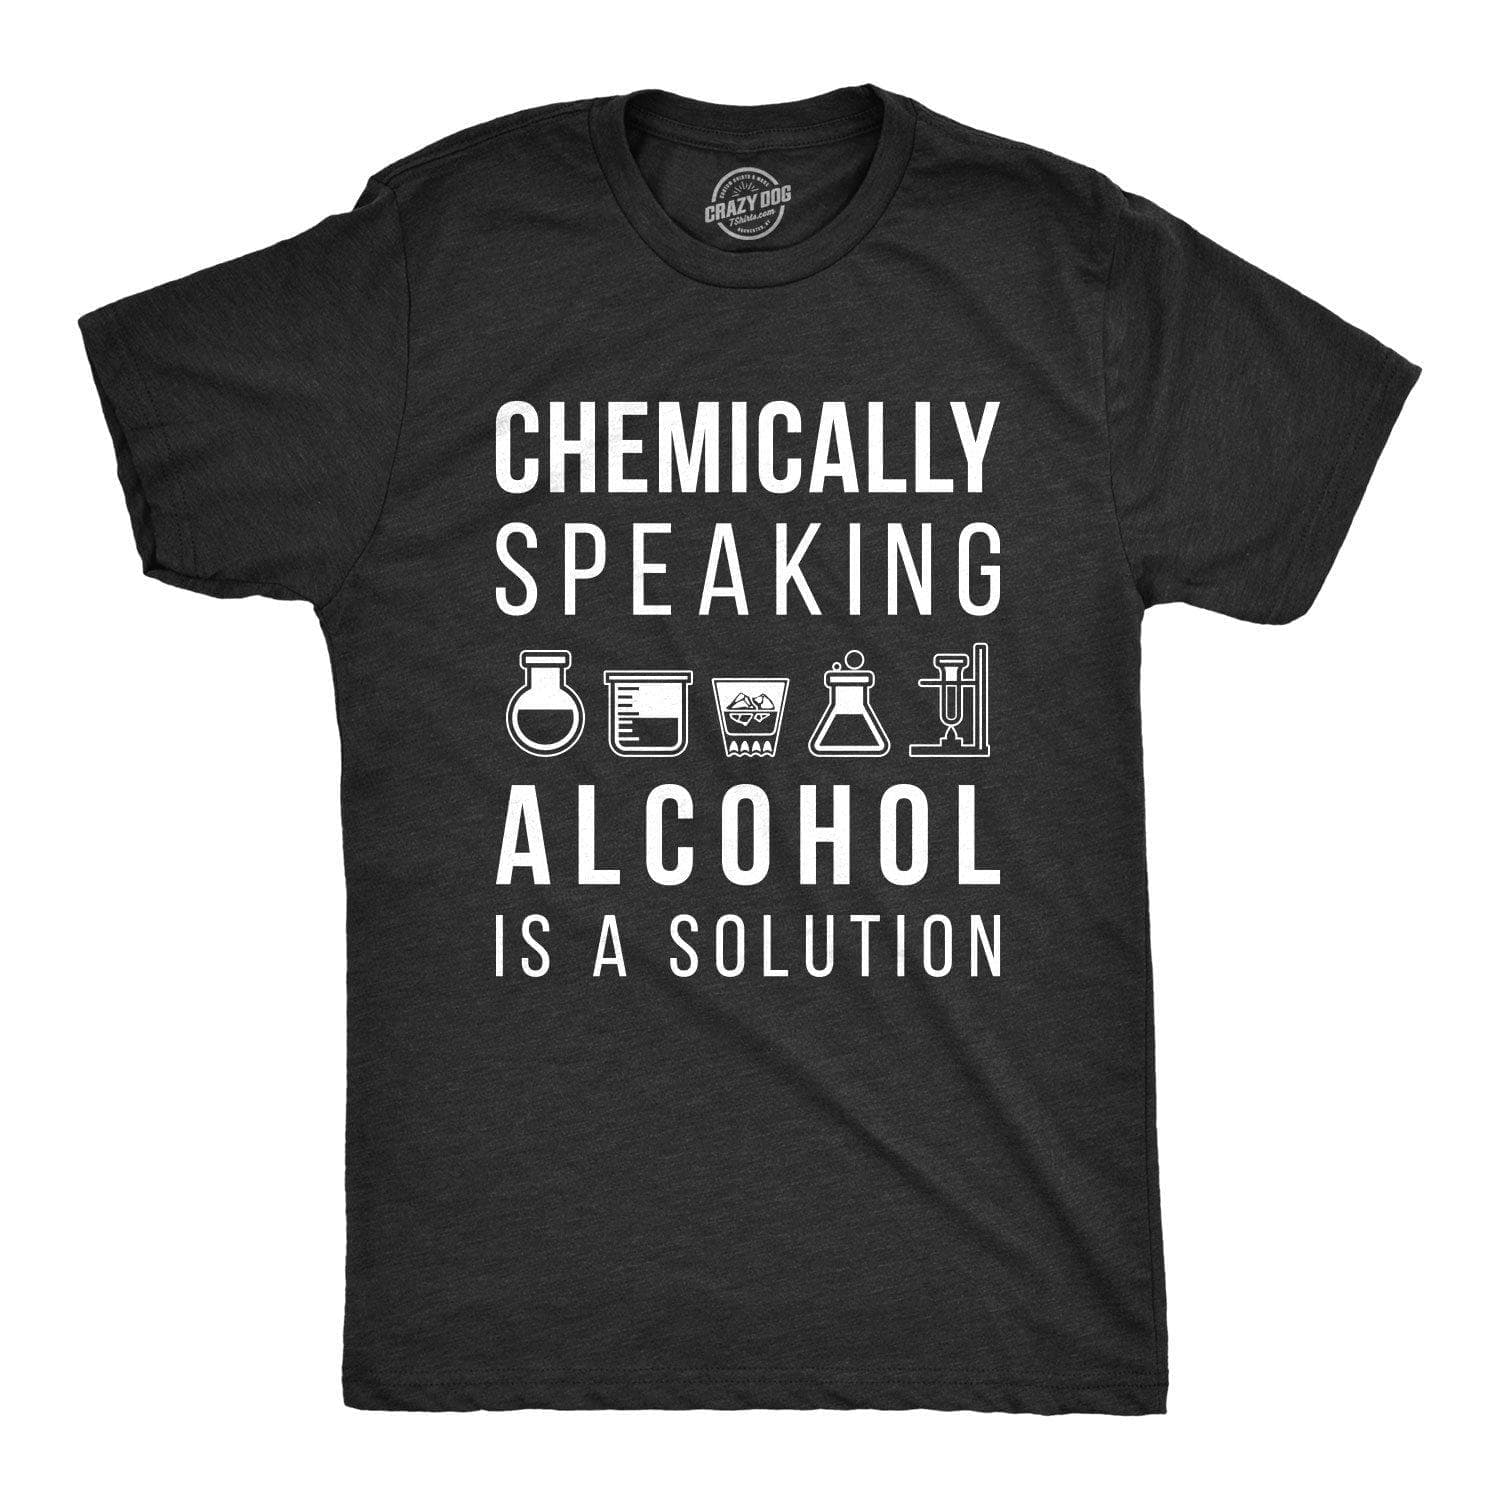 Alcohol Is A Solution Men's Tshirt - Crazy Dog T-Shirts